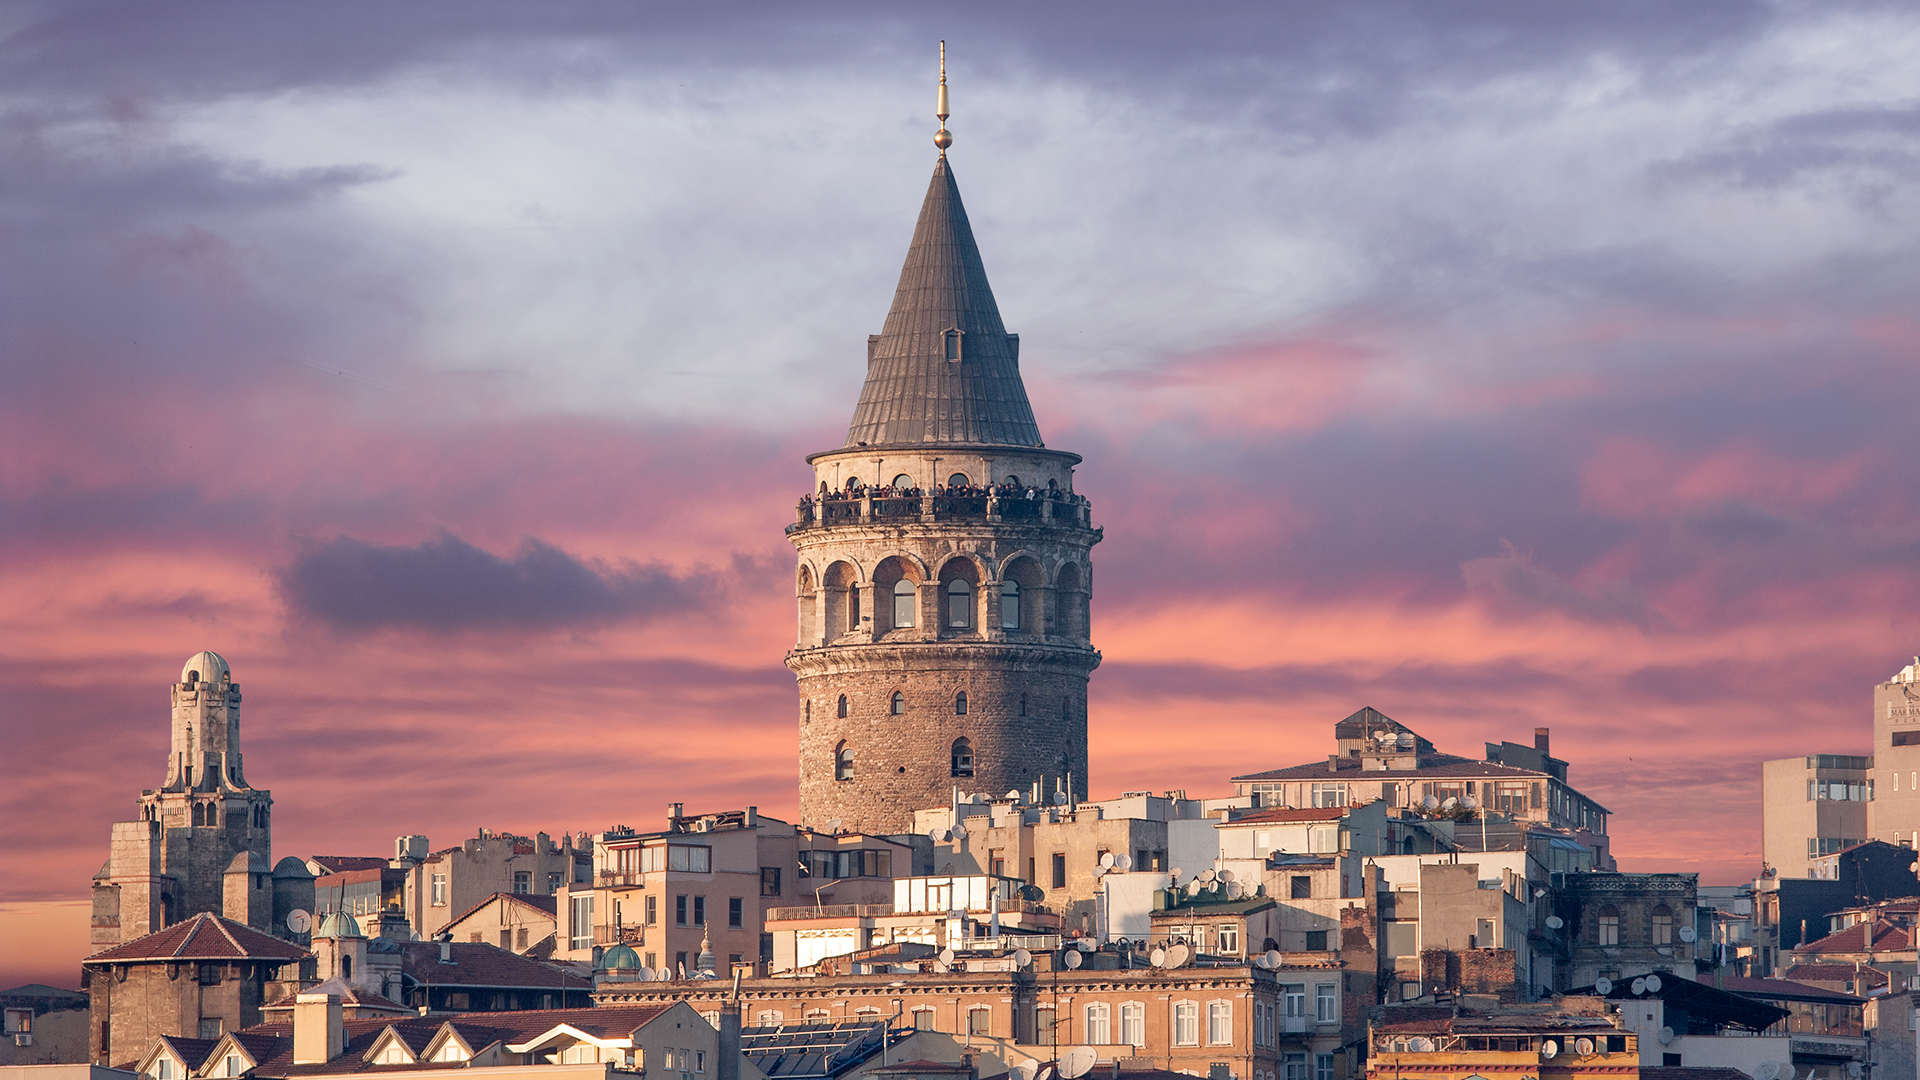 History Of Galata Tower From Past To Present